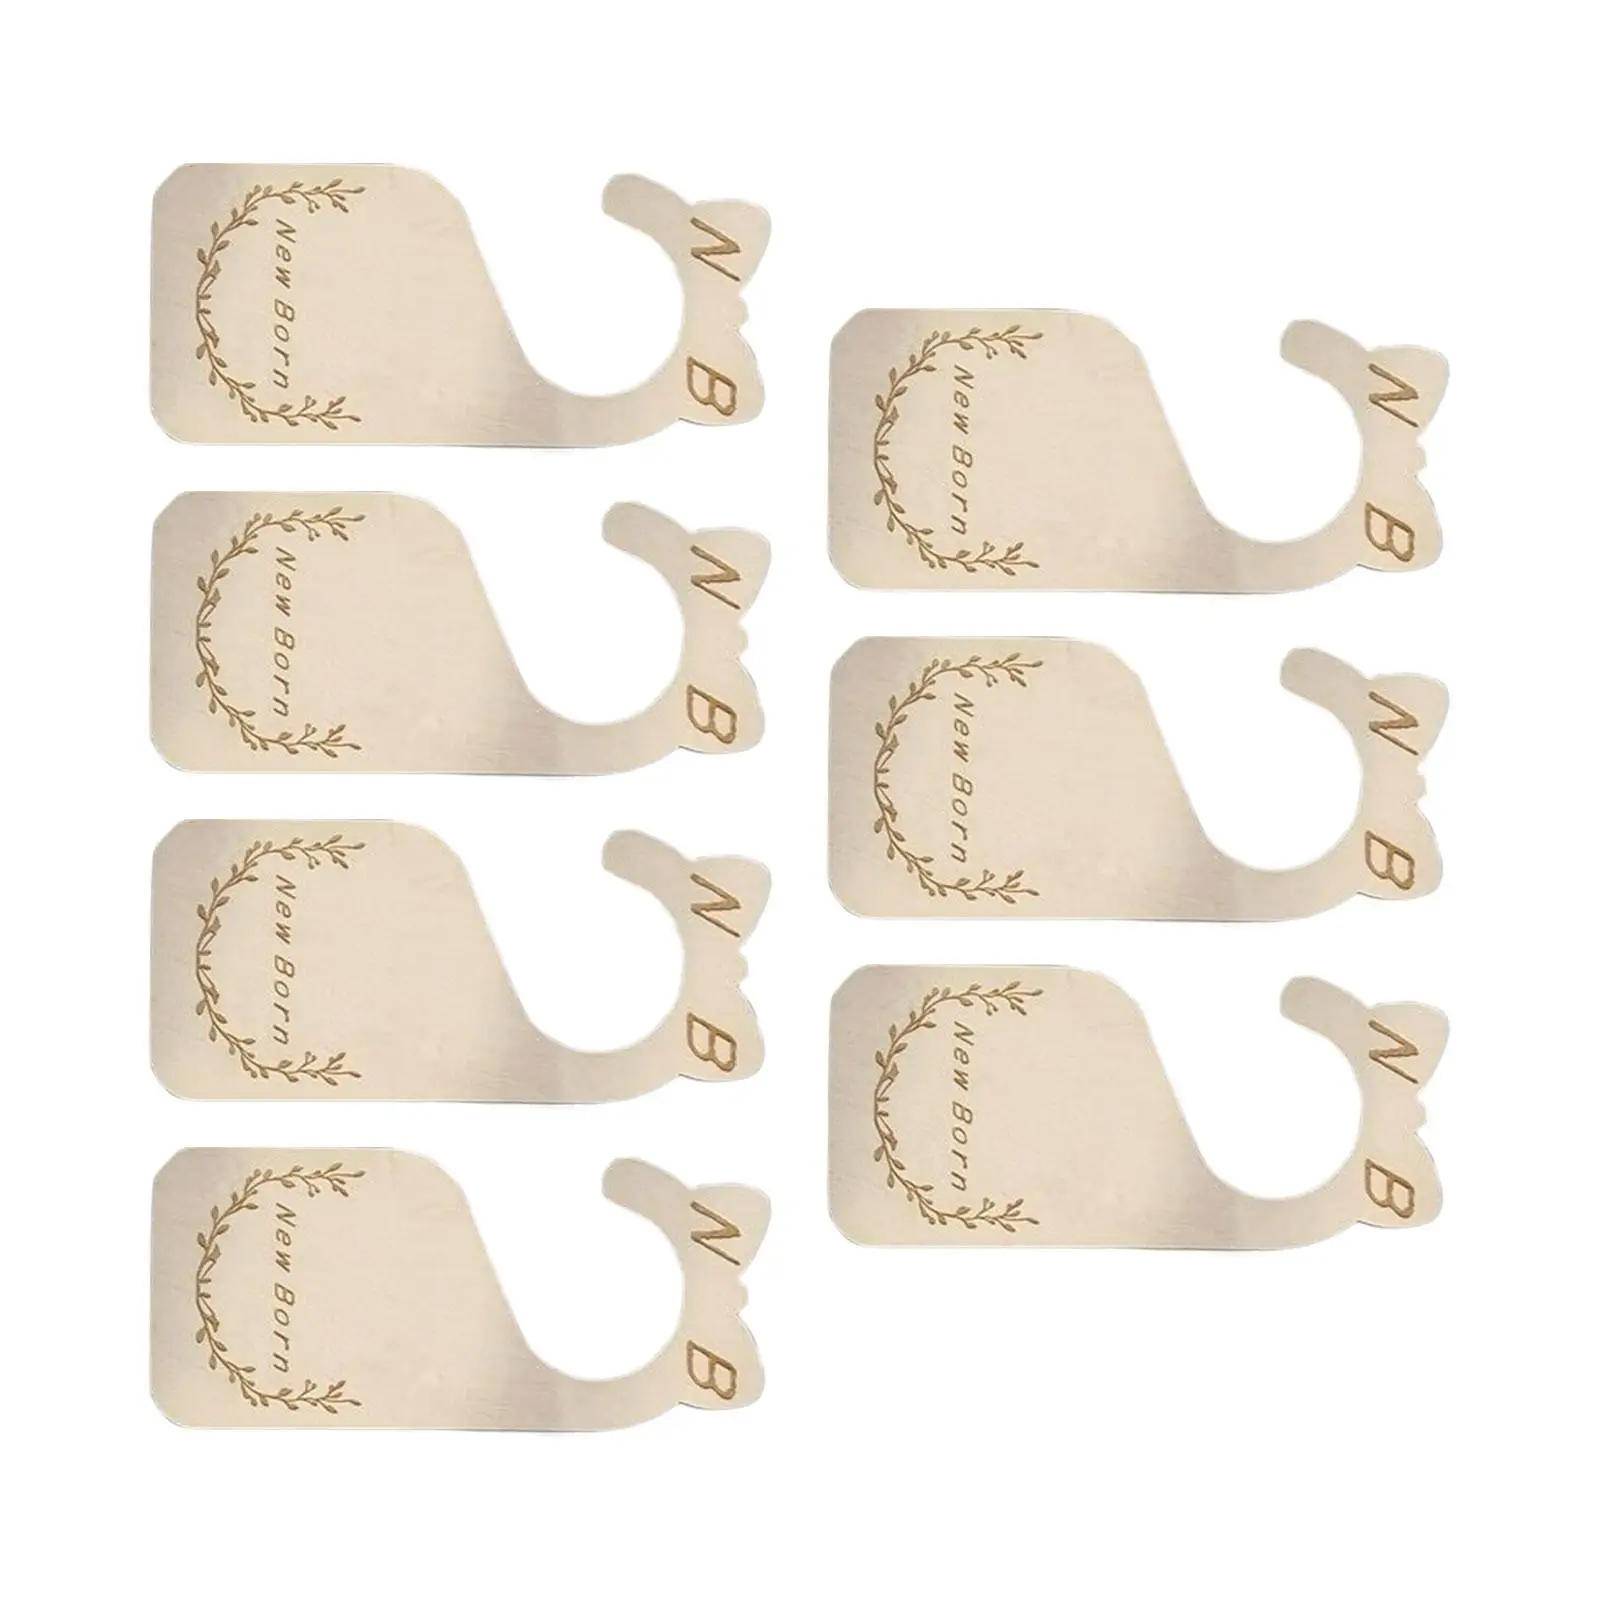 7Pcs Baby Closet Size Divider, Wooden Seperators Carving Adorable Closet Organizer Tag, for Infant to 24 Months Gift Supplies